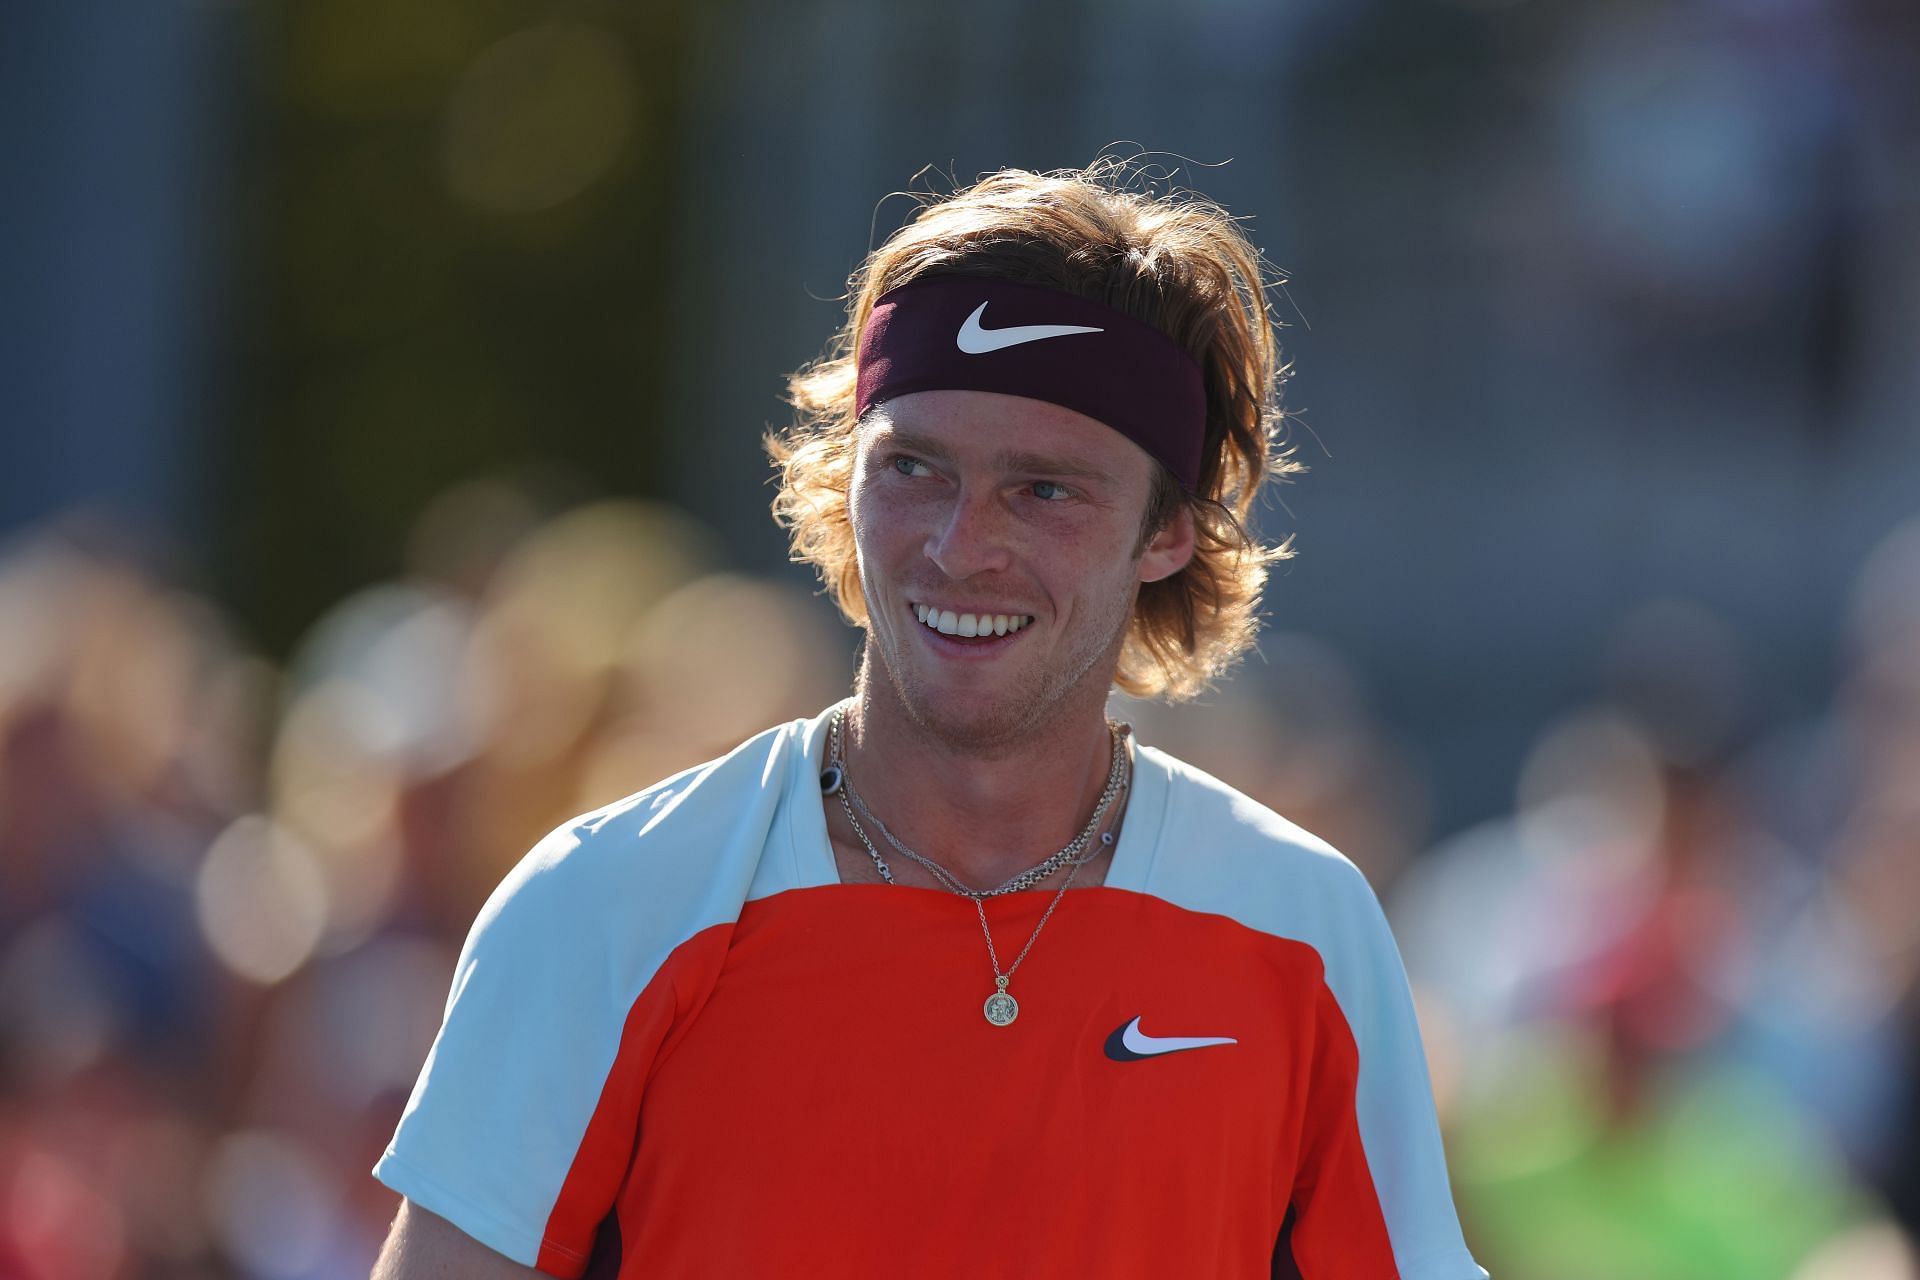 Andrey Rublev at the 2022 US Open.